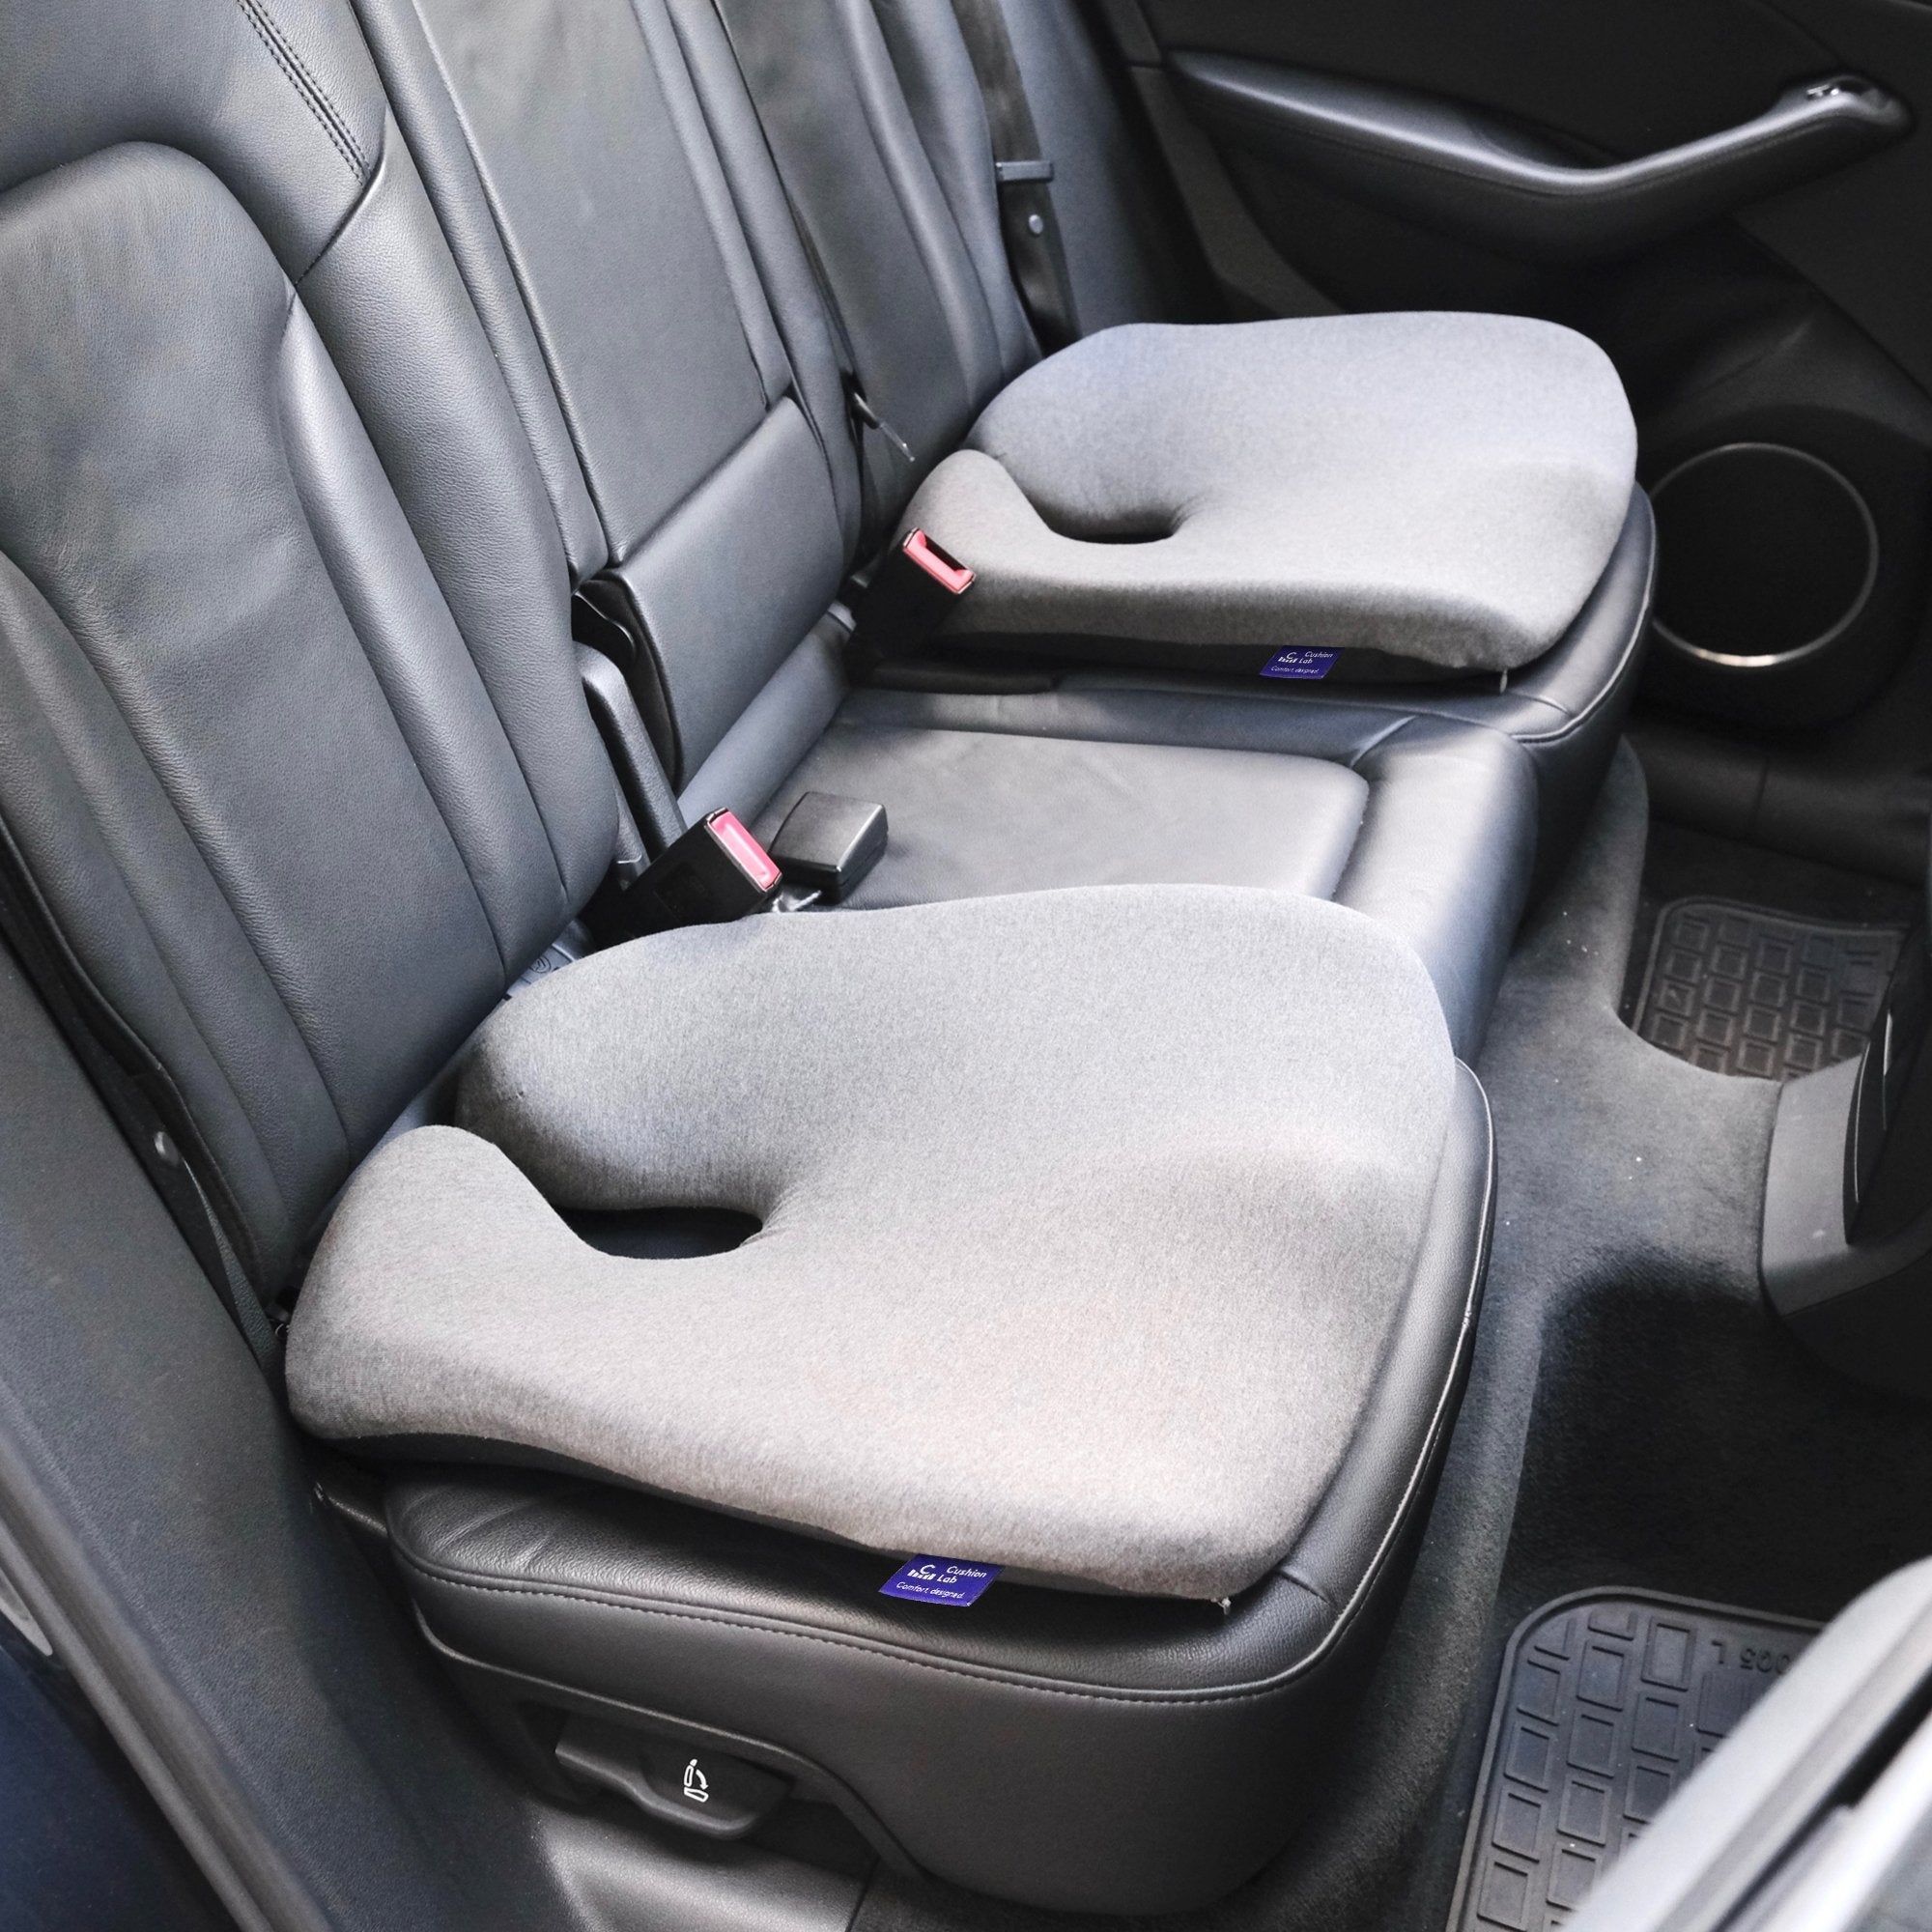 Thickening Protection Hip Car Cushion For Driving Seat Incline Raised  Breathable Adult Car Seat Cushion Non-Slip Wear Comfortable Driver Seat  Cushion